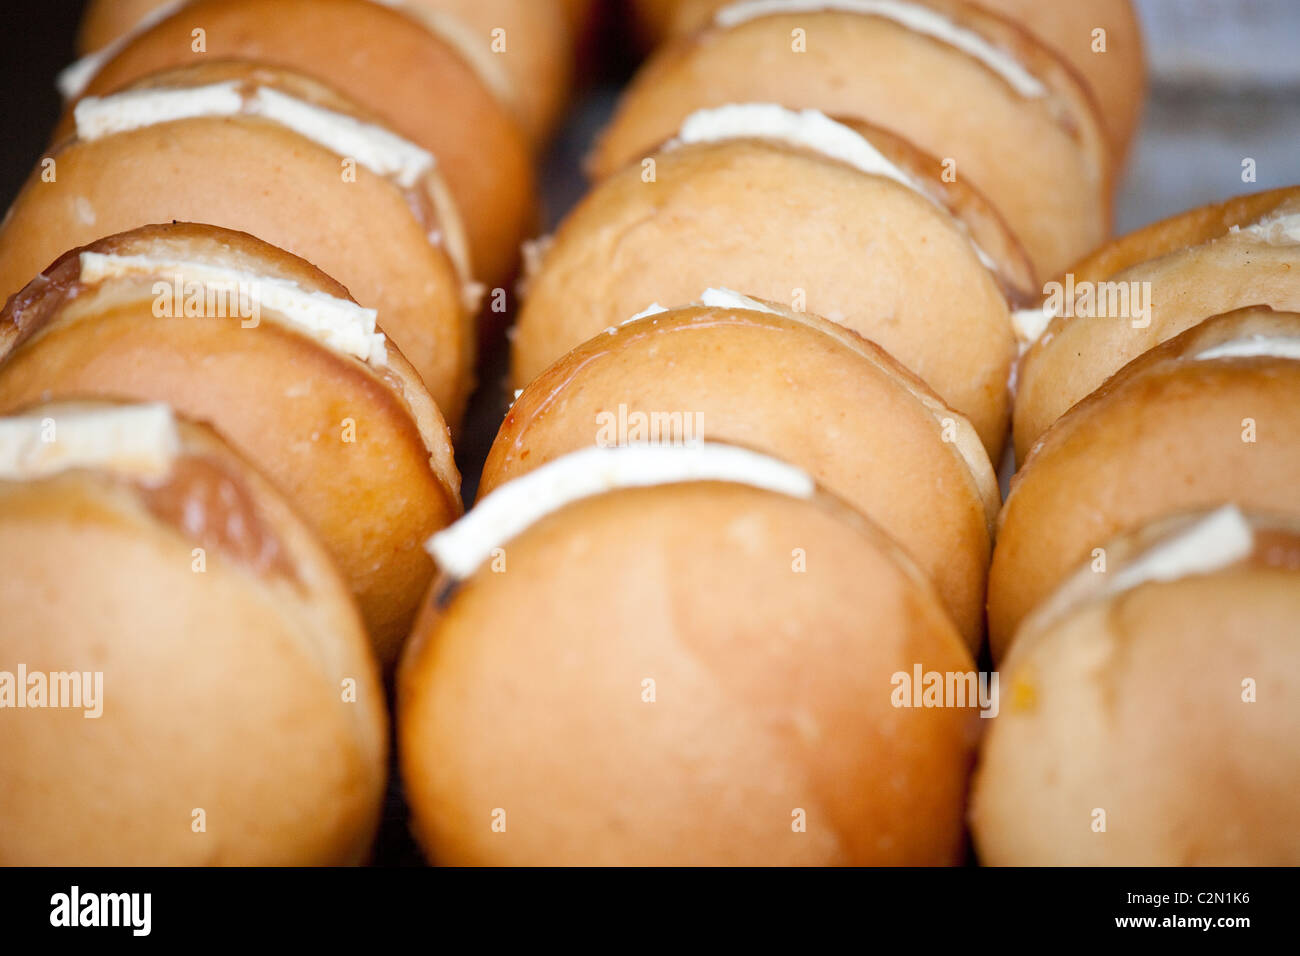 Dolce and queso filled donuts, Getsamani, old town, Cartagena, Colombia Stock Photo